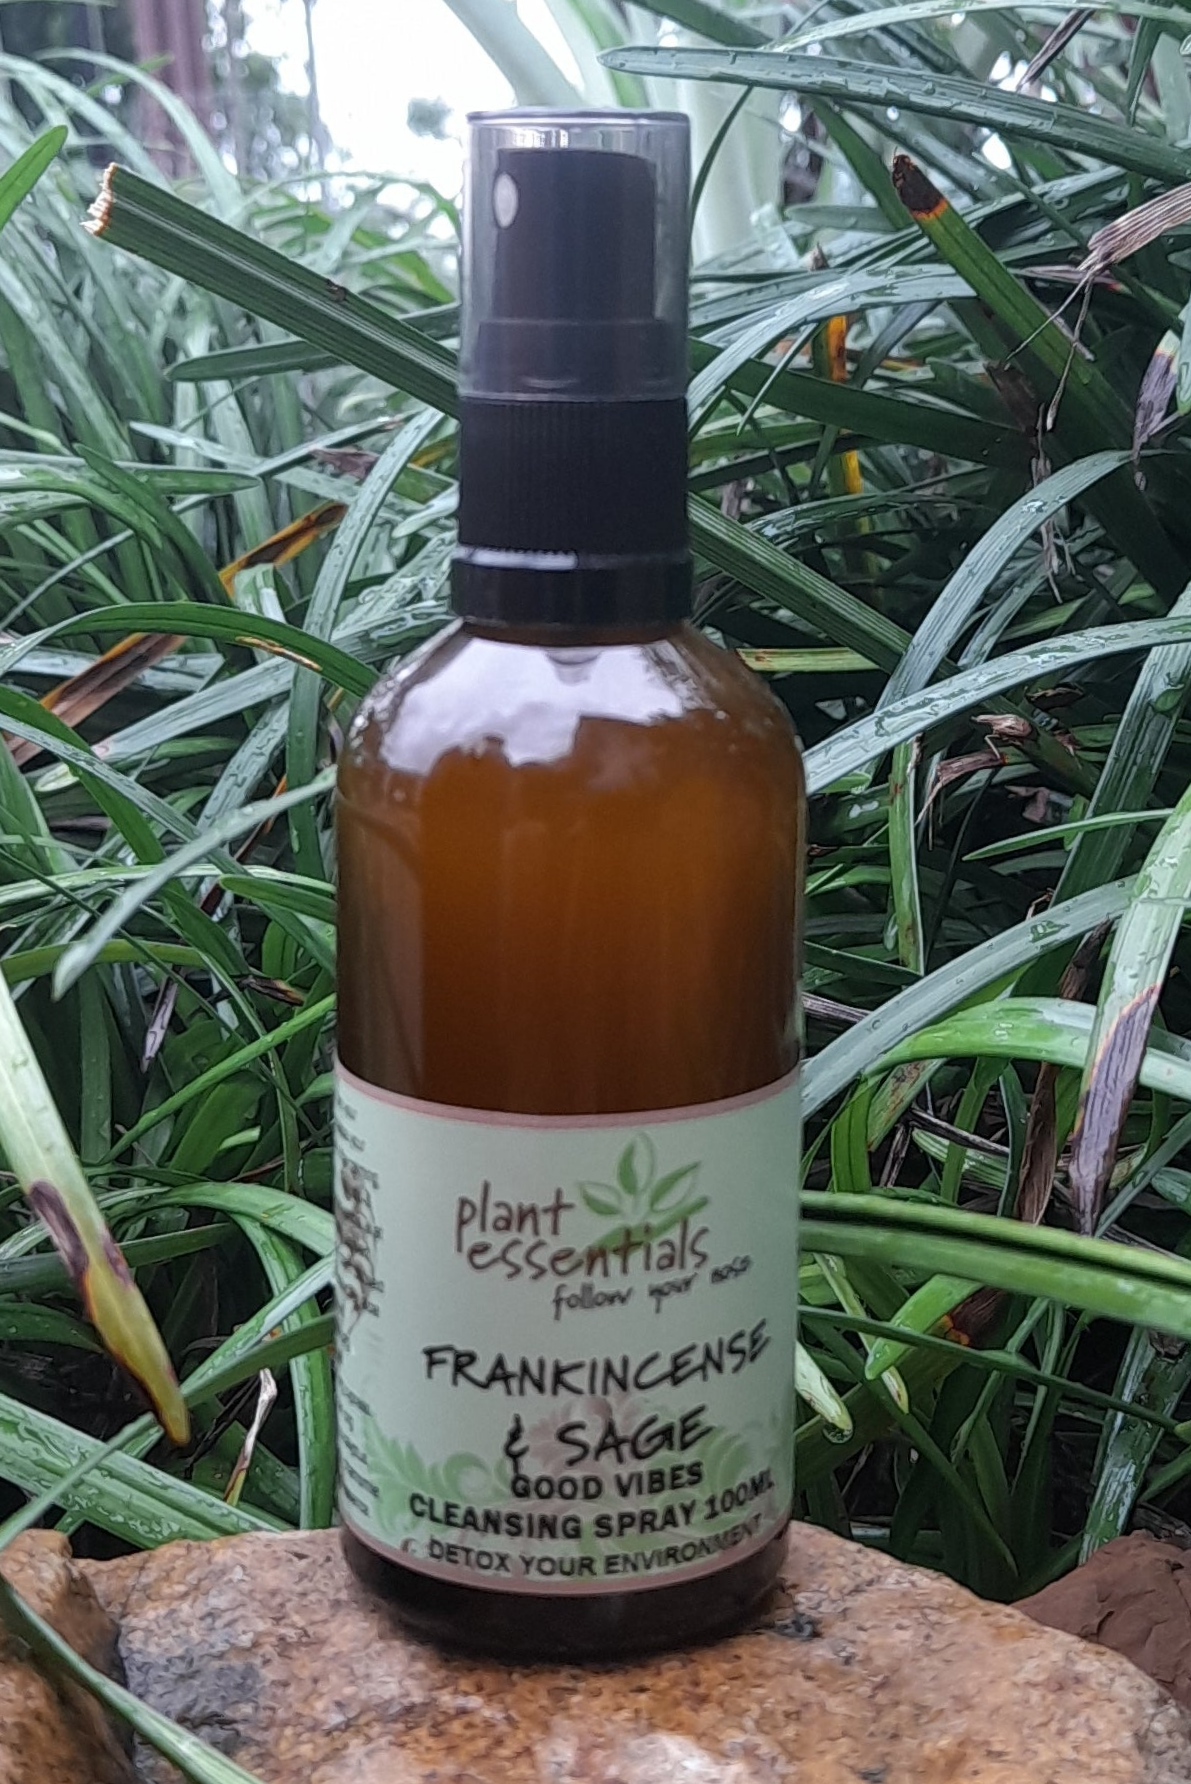 Frankincense & Sage Good Vibes Cleansing Spray